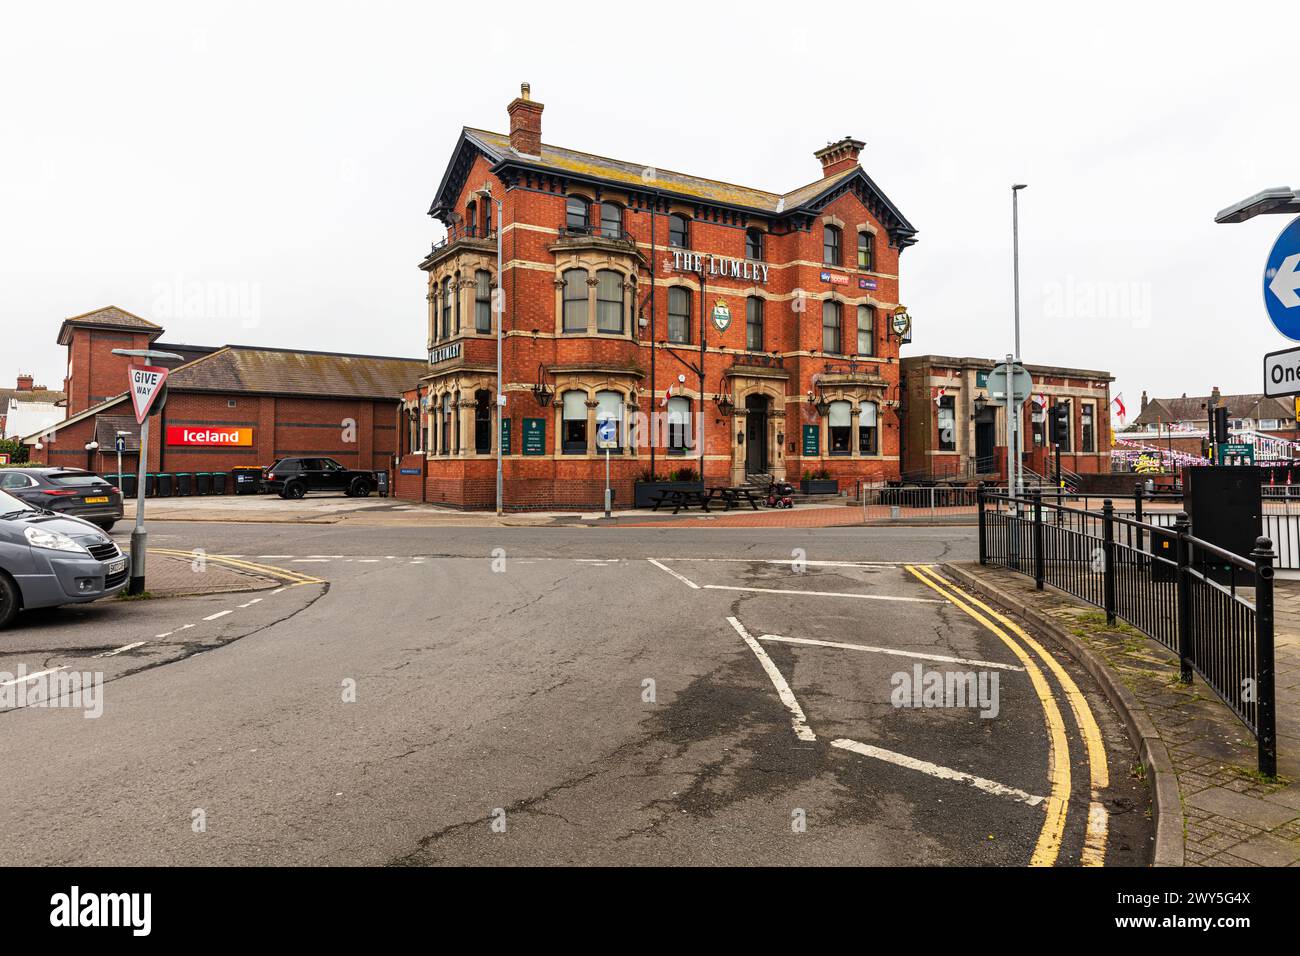 The Lumley hotel, Skegness, Lincolnshire, UK, England, The Lumley, The Lumley Skegness, Lumley Square, hotel, hotels, building, facade, Stock Photo